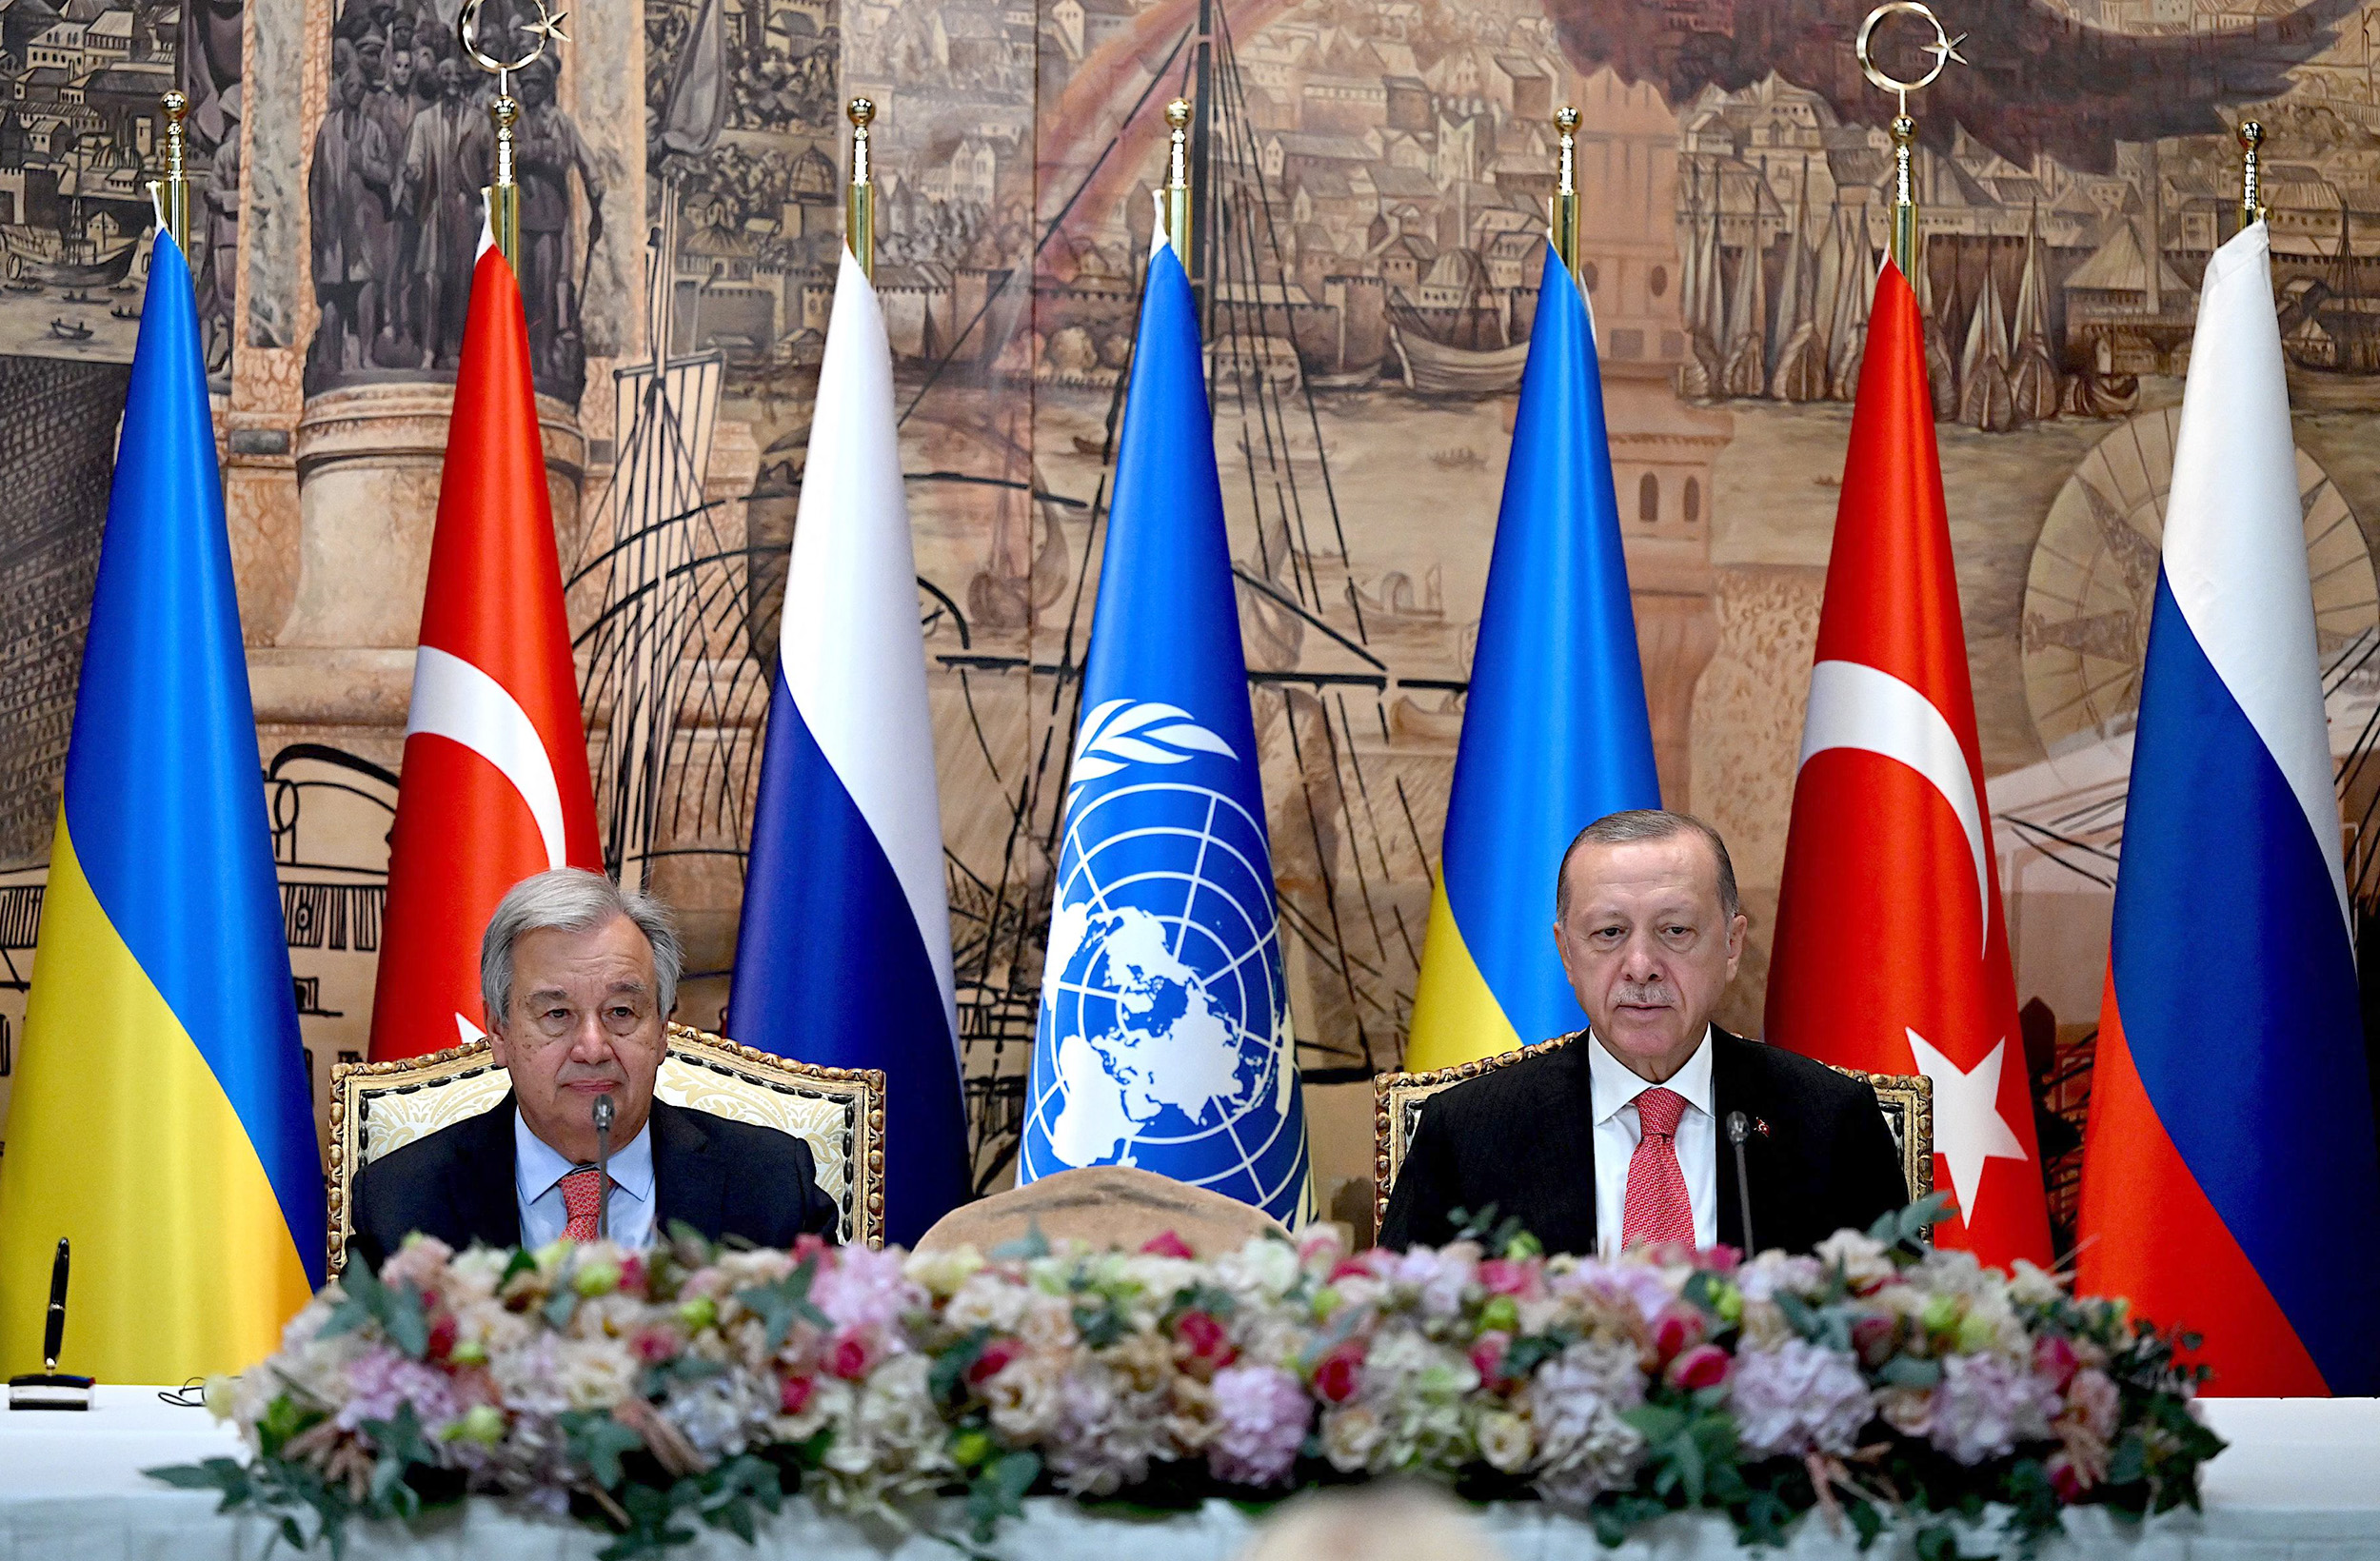 United Nations Secretary-General Antonio Guterres, left, and Turkish President Recep Tayyip Erdogan, right, sit at the start of the signature ceremony for the safe transportation of grain and foodstuffs from Ukrainian ports, in Istanbul, Turkey, on July 22